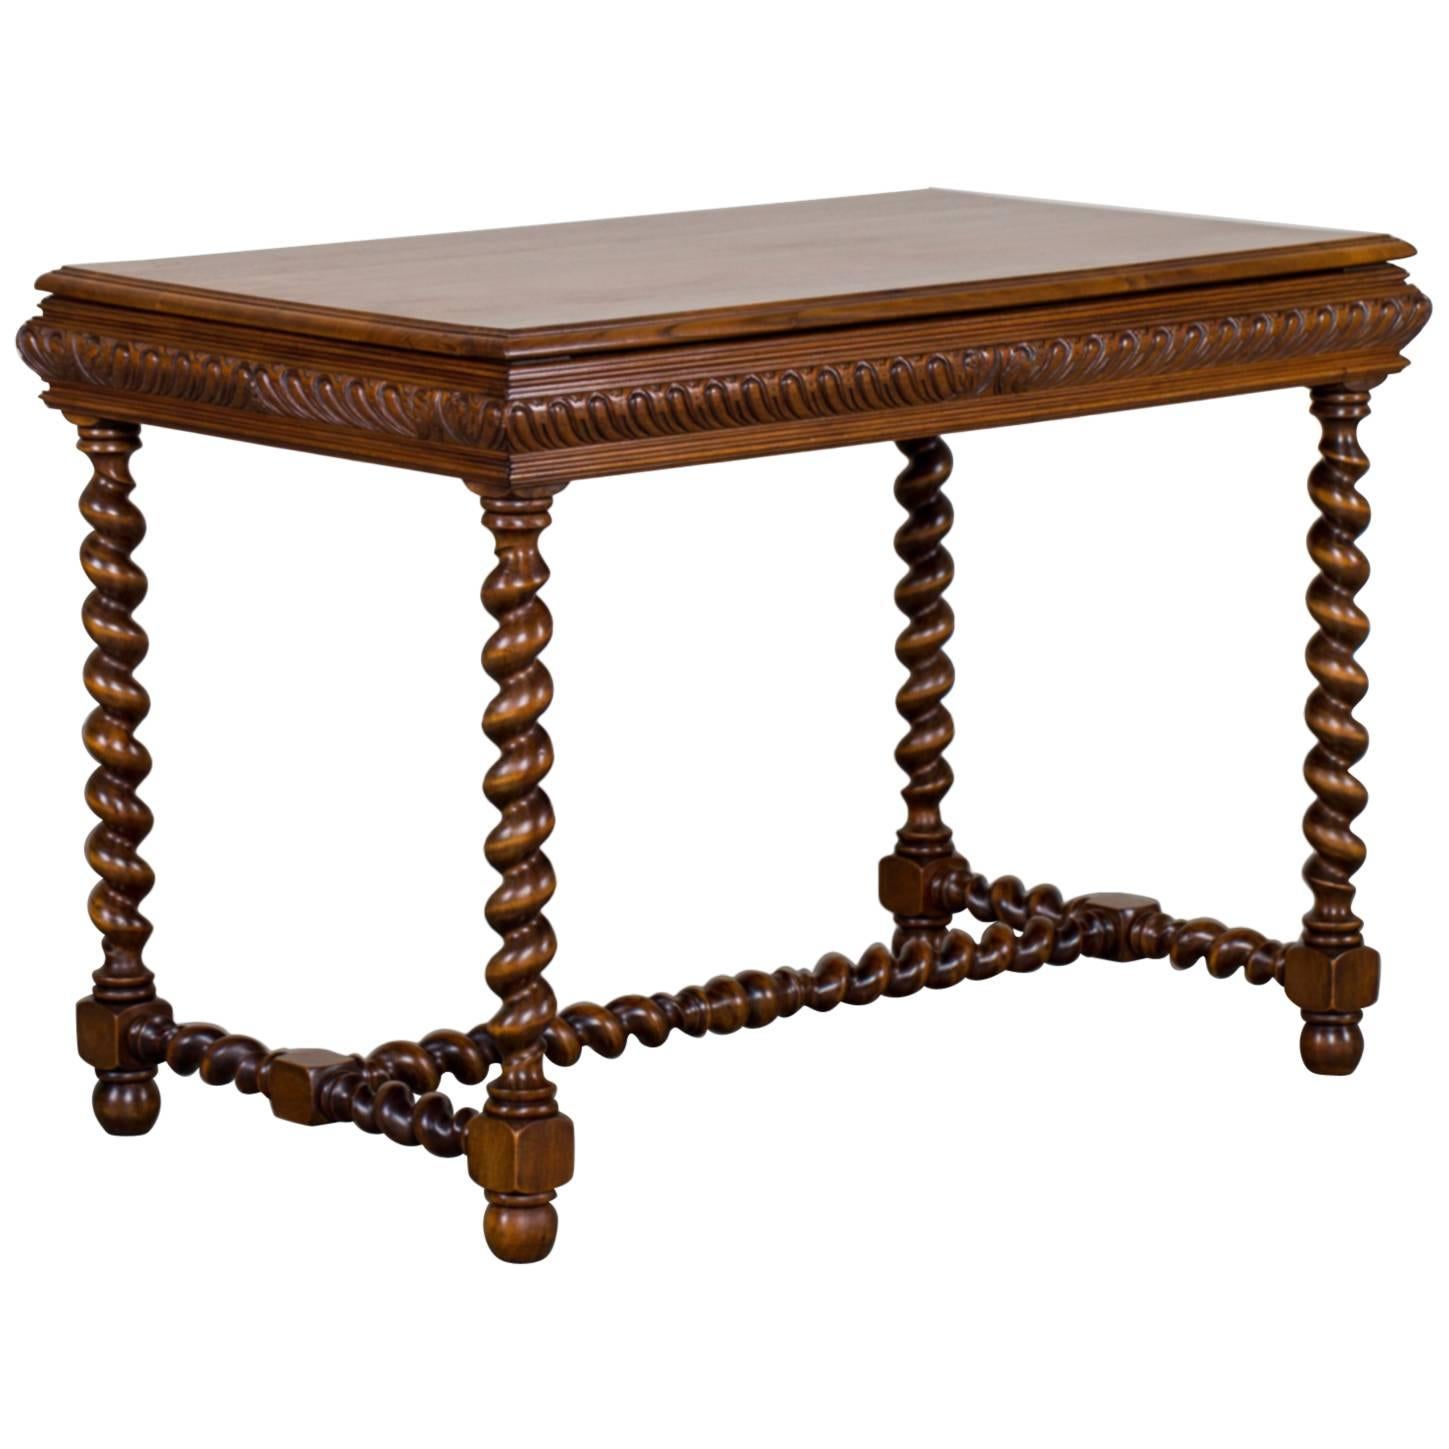 Vintage French Henri II Style Walnut Table with Drawer, circa 1920